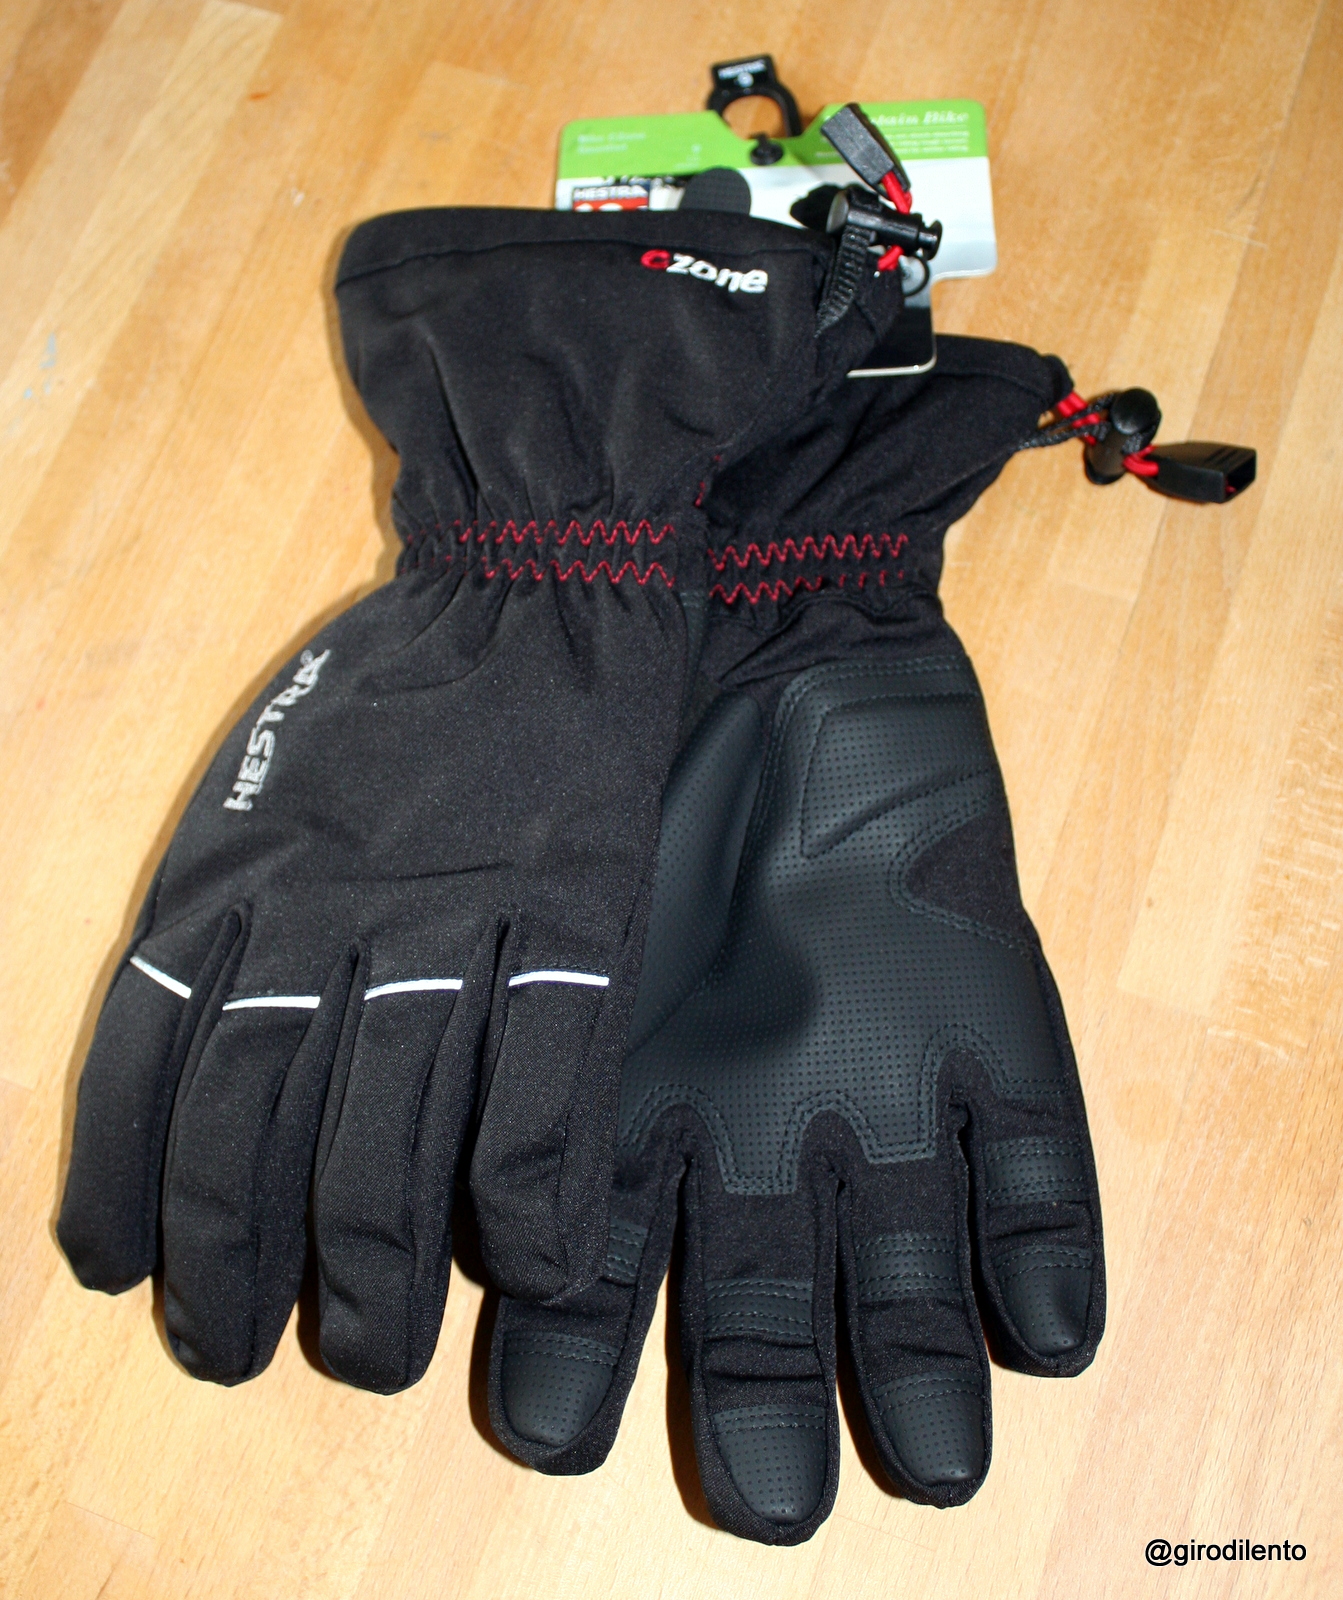 Hestra C-Zone gauntlet winter cycling gloves